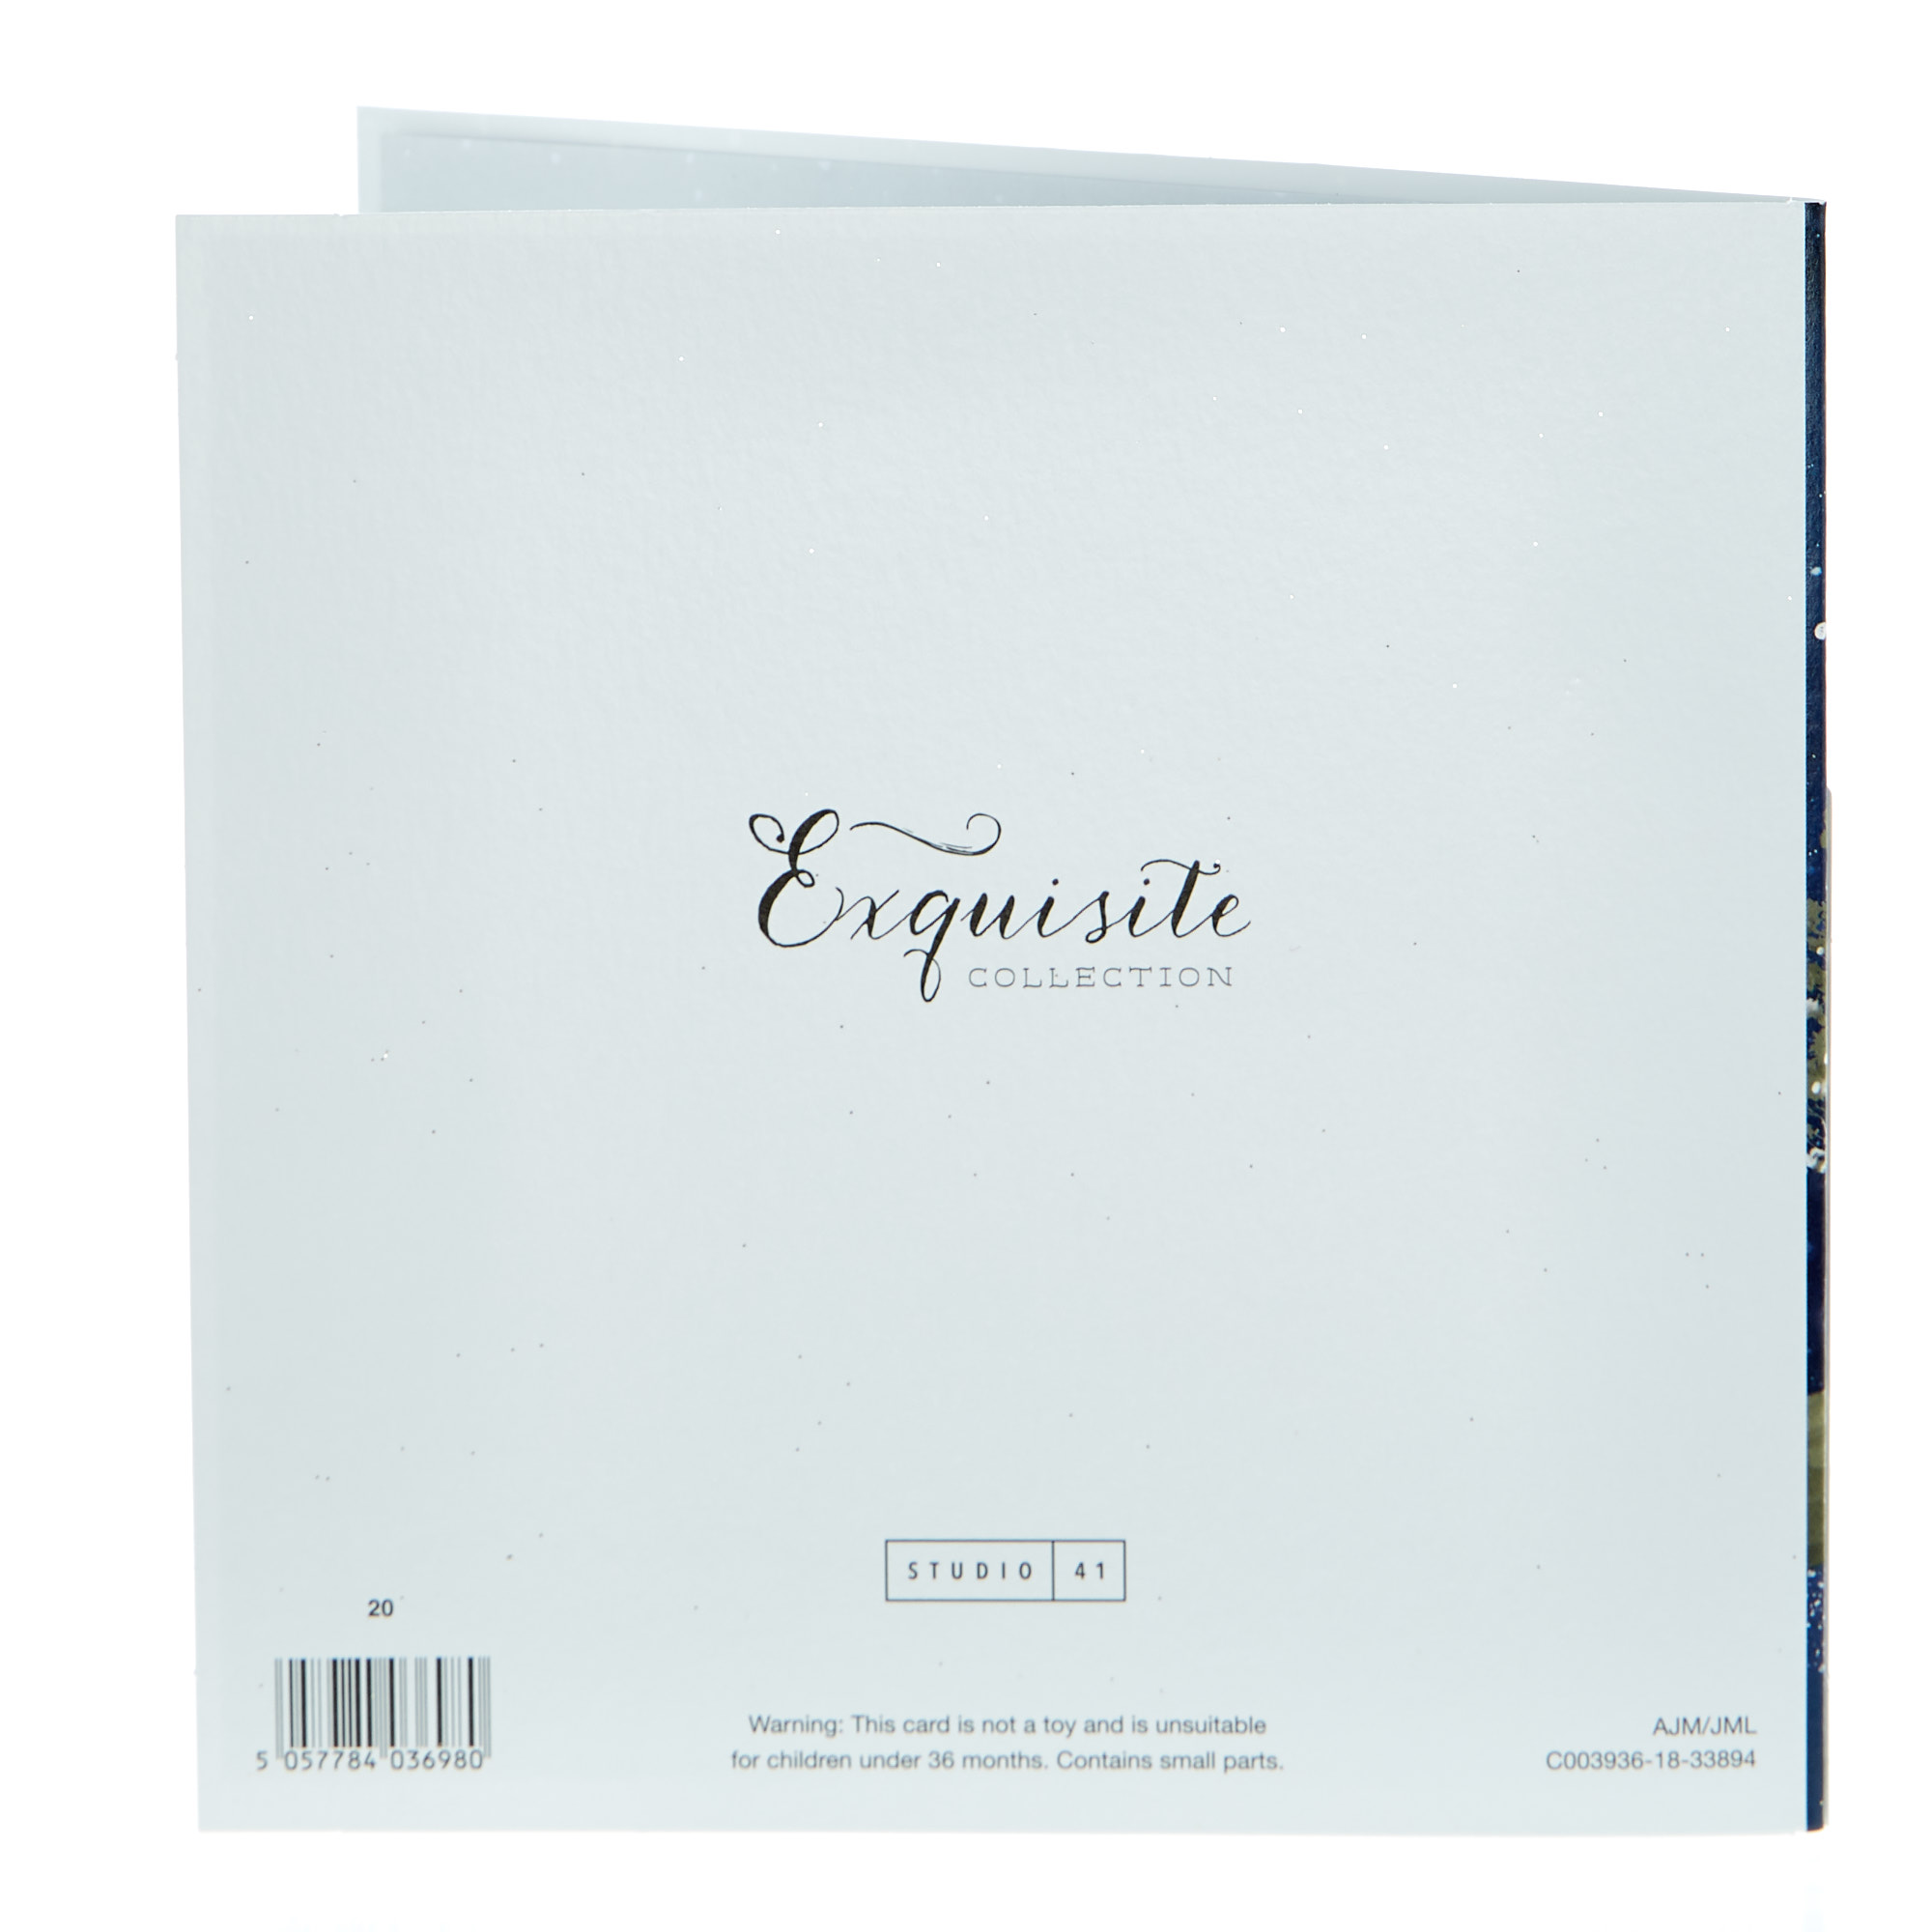 Exquisite Collection Christmas Card - A Wish For Both of You